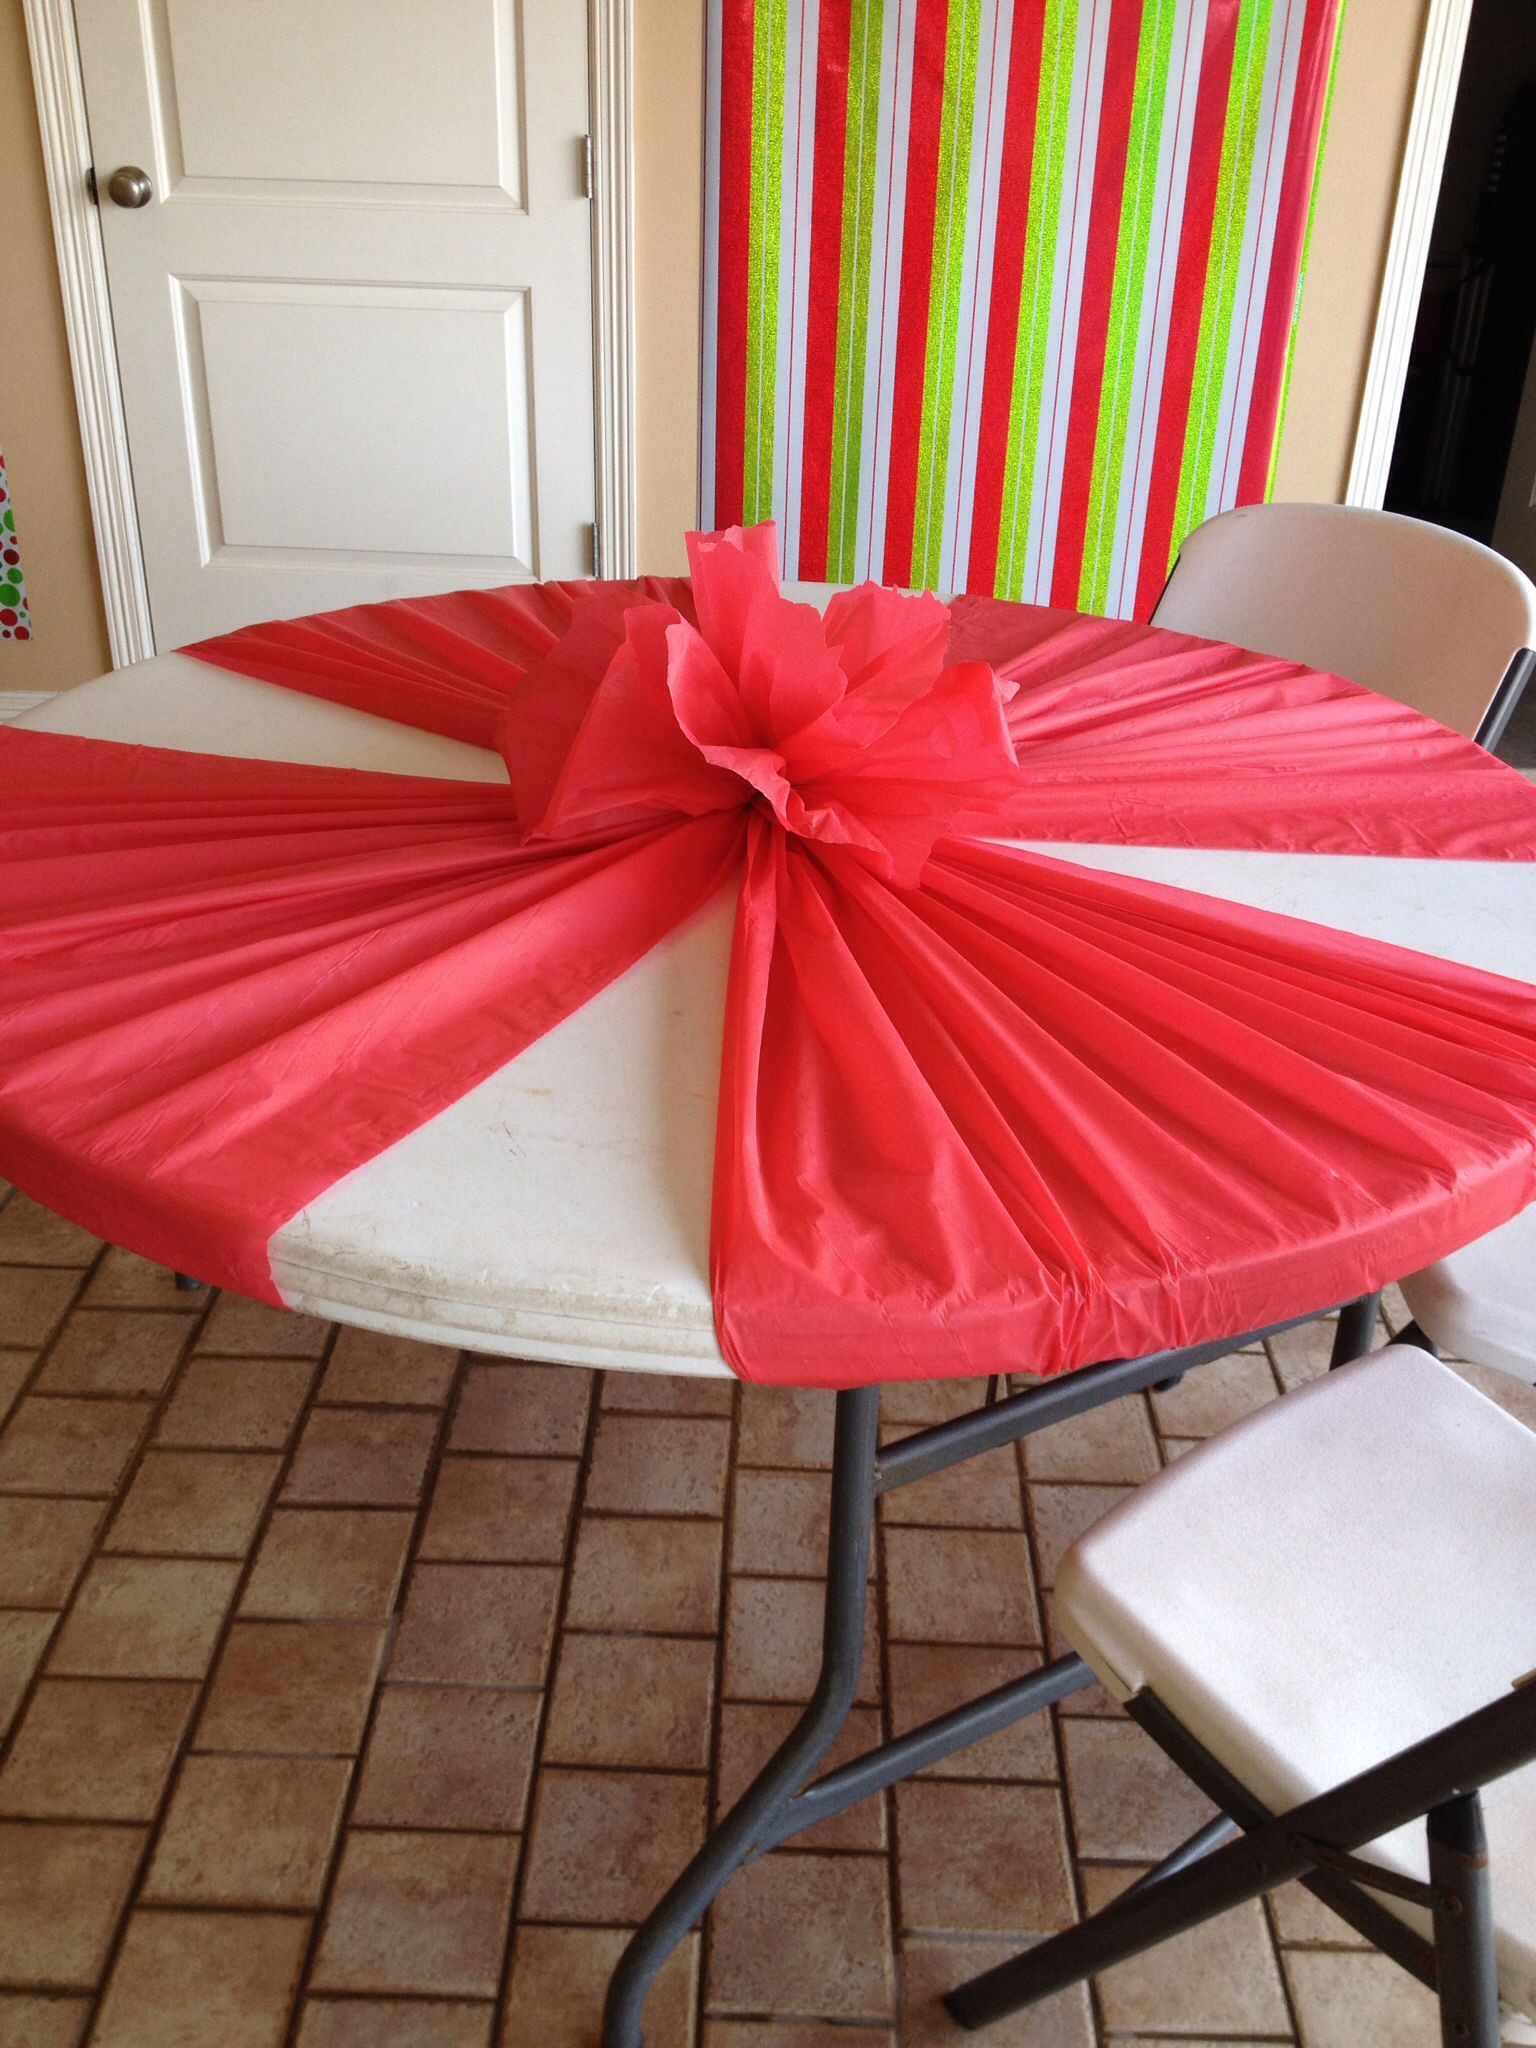 Tablecloth Ideas For Graduation Party
 Might be fun with two colors that cover the whole table